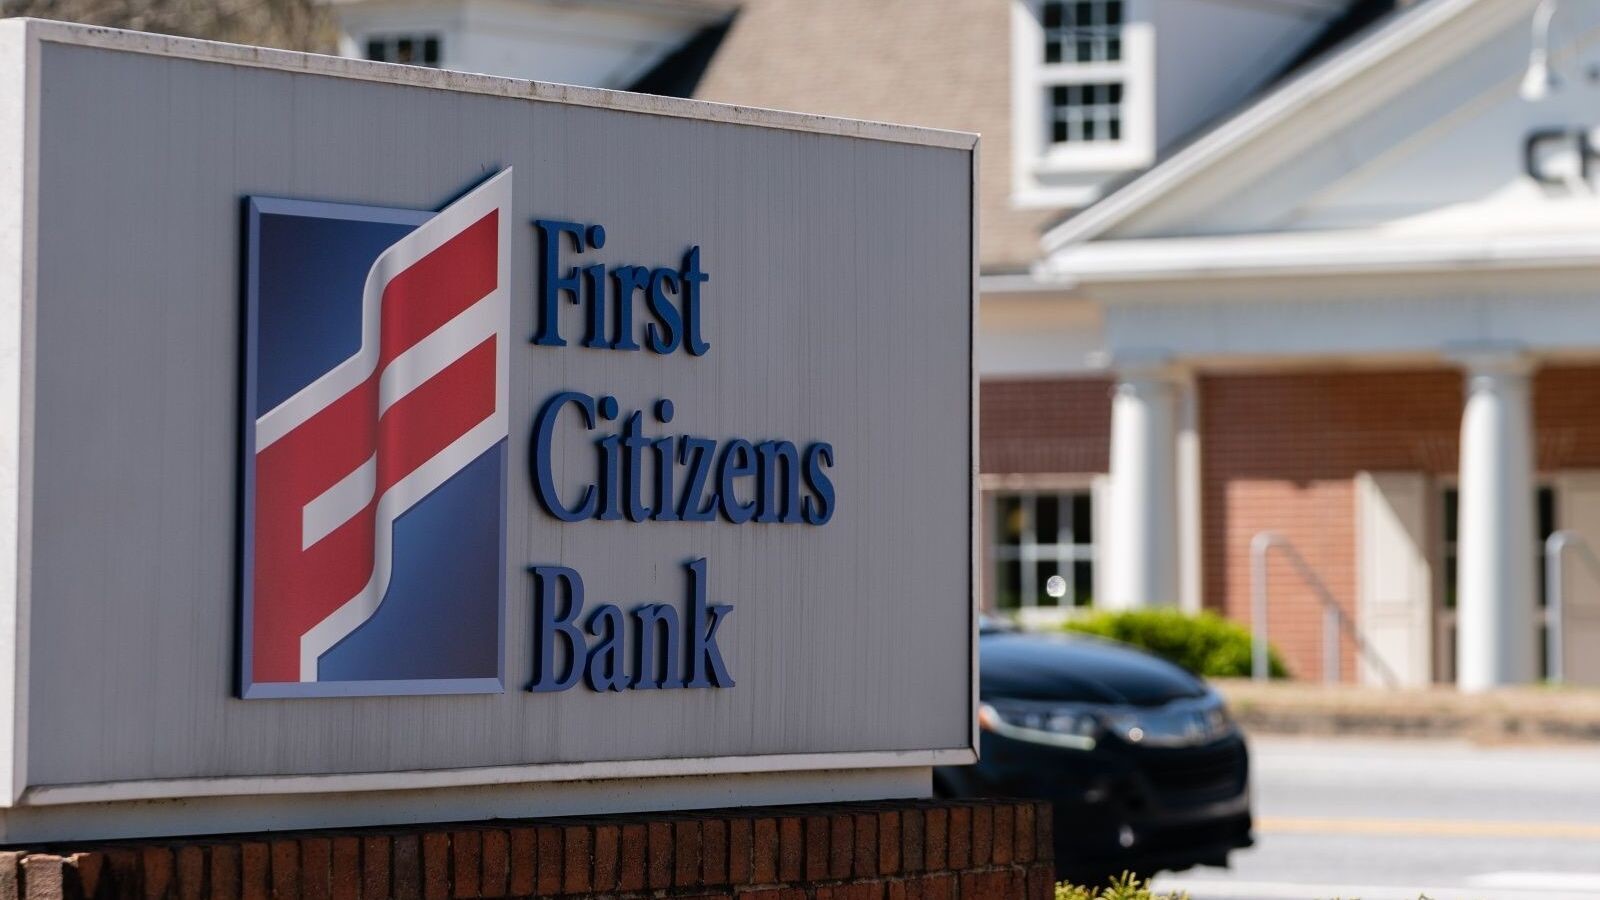 How to Get a Business Loan From First Citizens